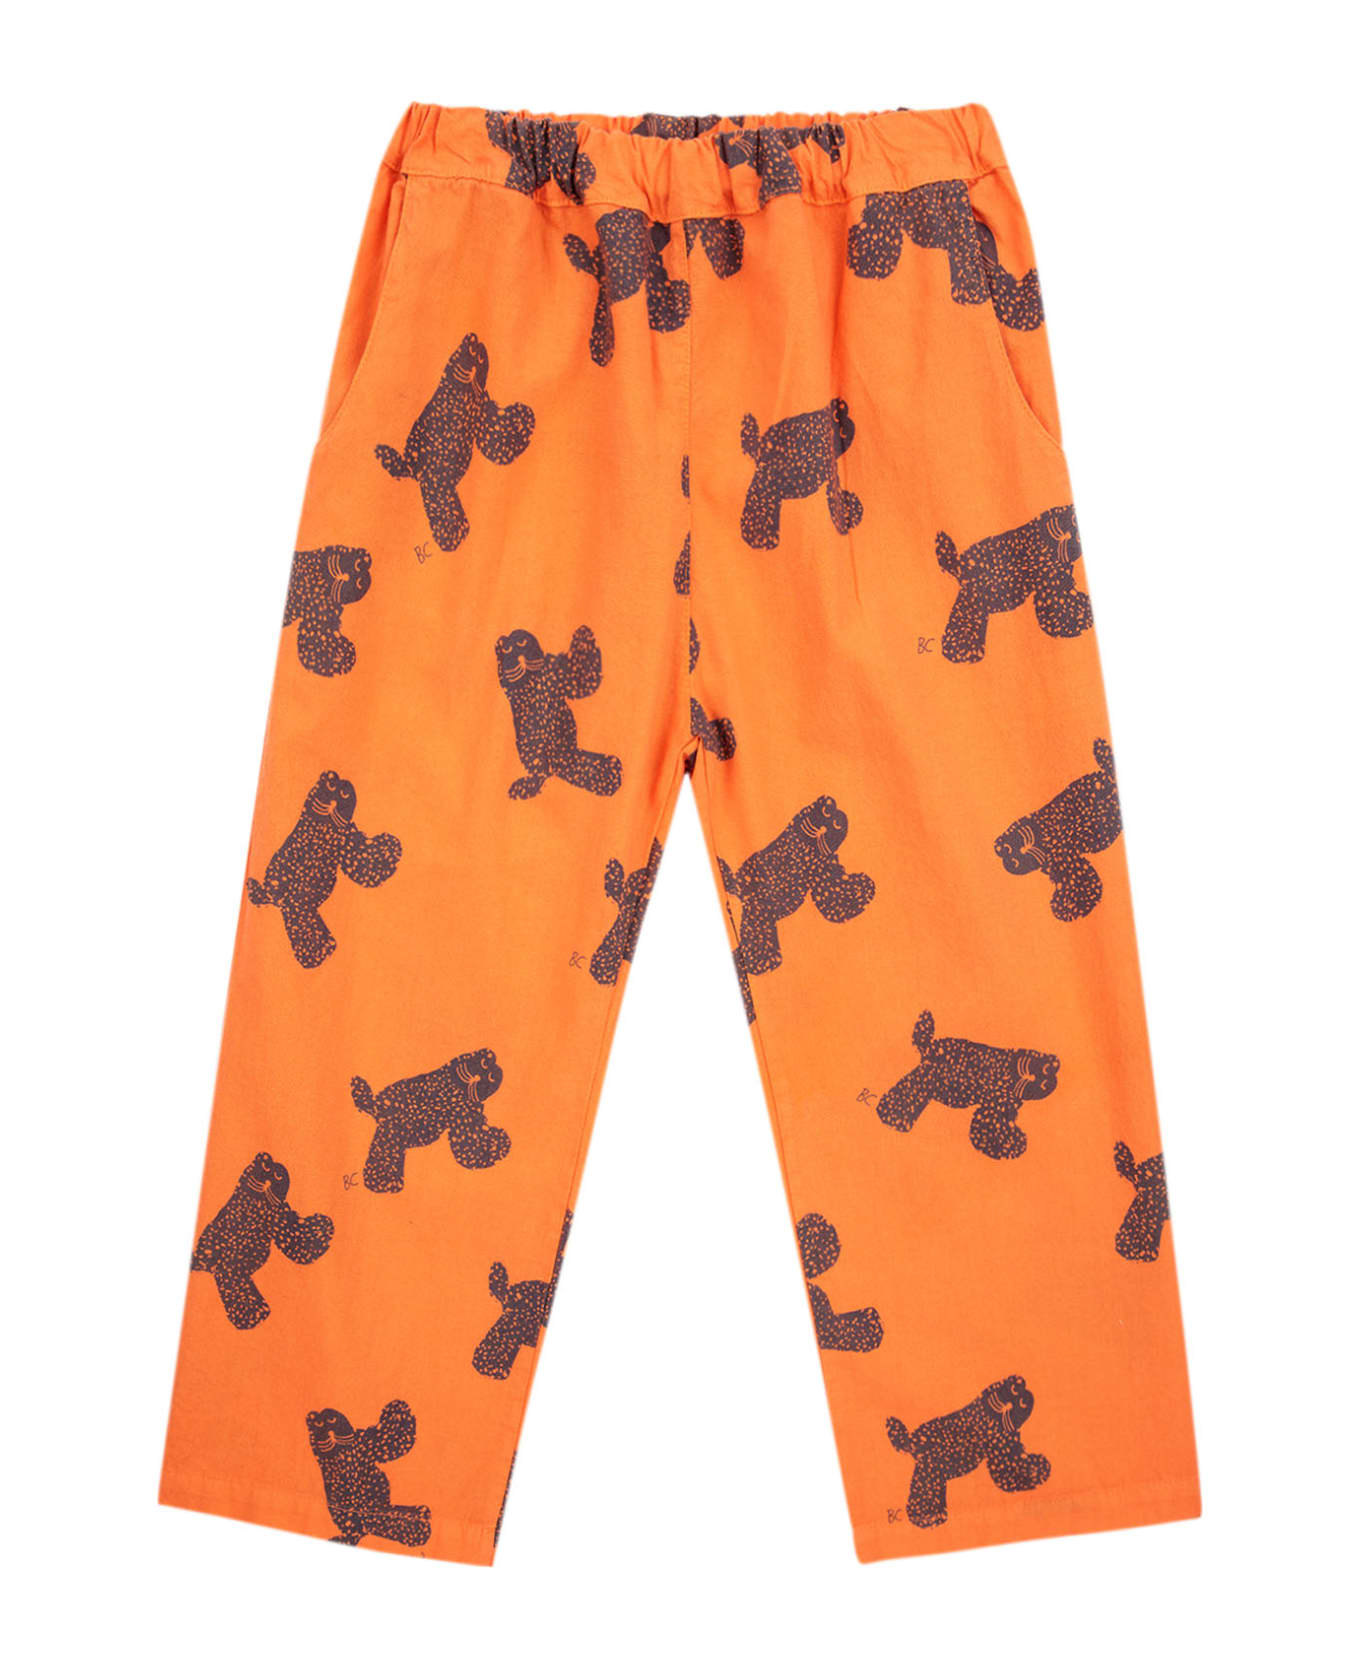 Bobo Choses Orange Trousers For Kids With All-over Cheetah Pattern - Orange